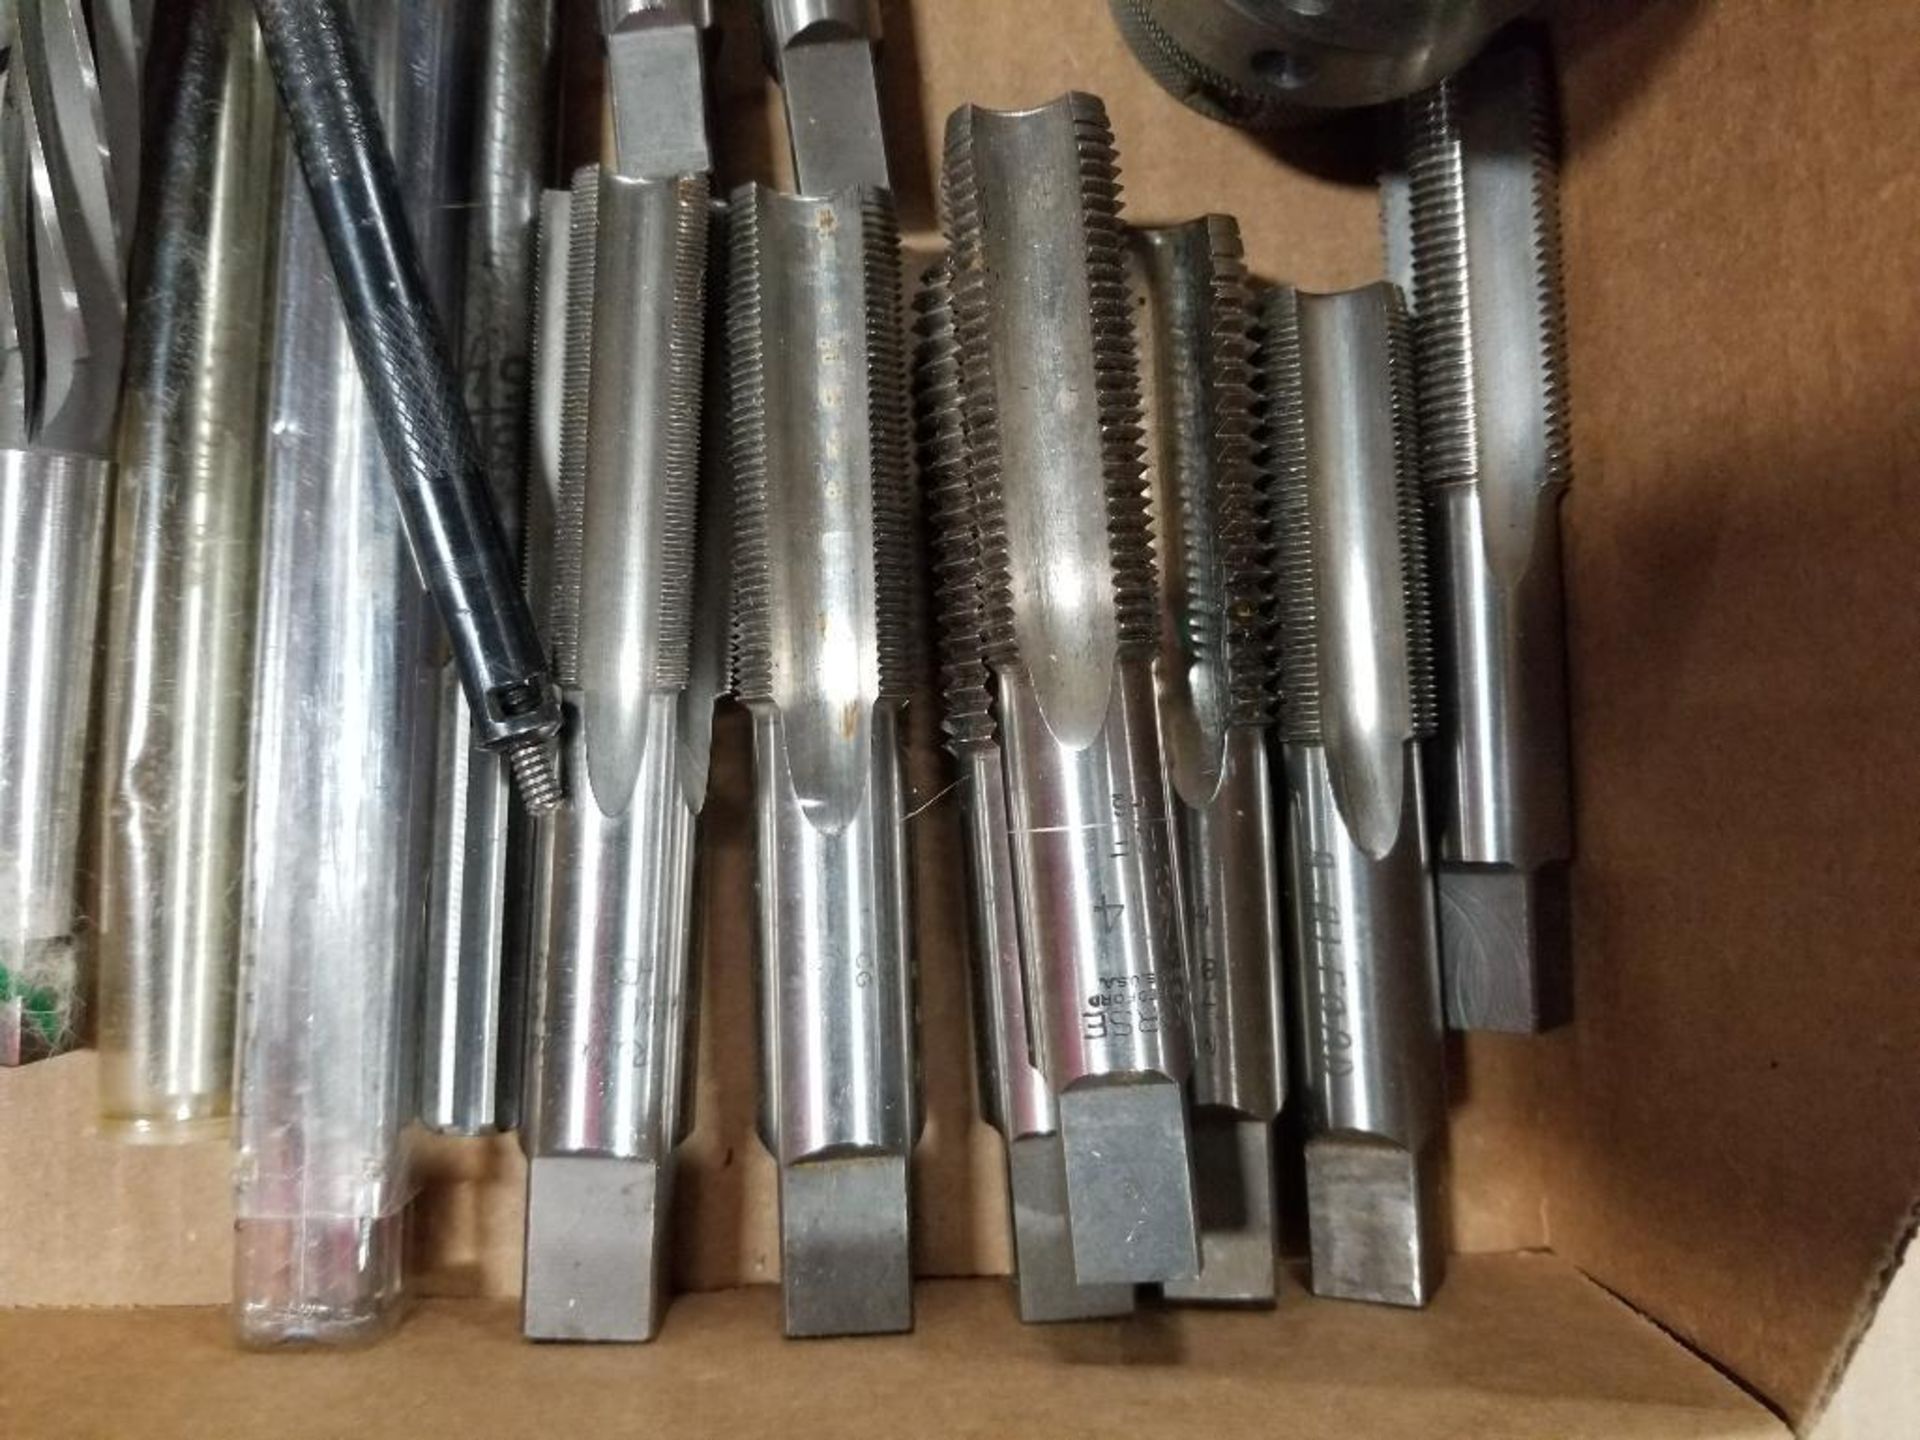 Assorted metalworking tooling. Cutters, taps, reamers. - Image 14 of 18